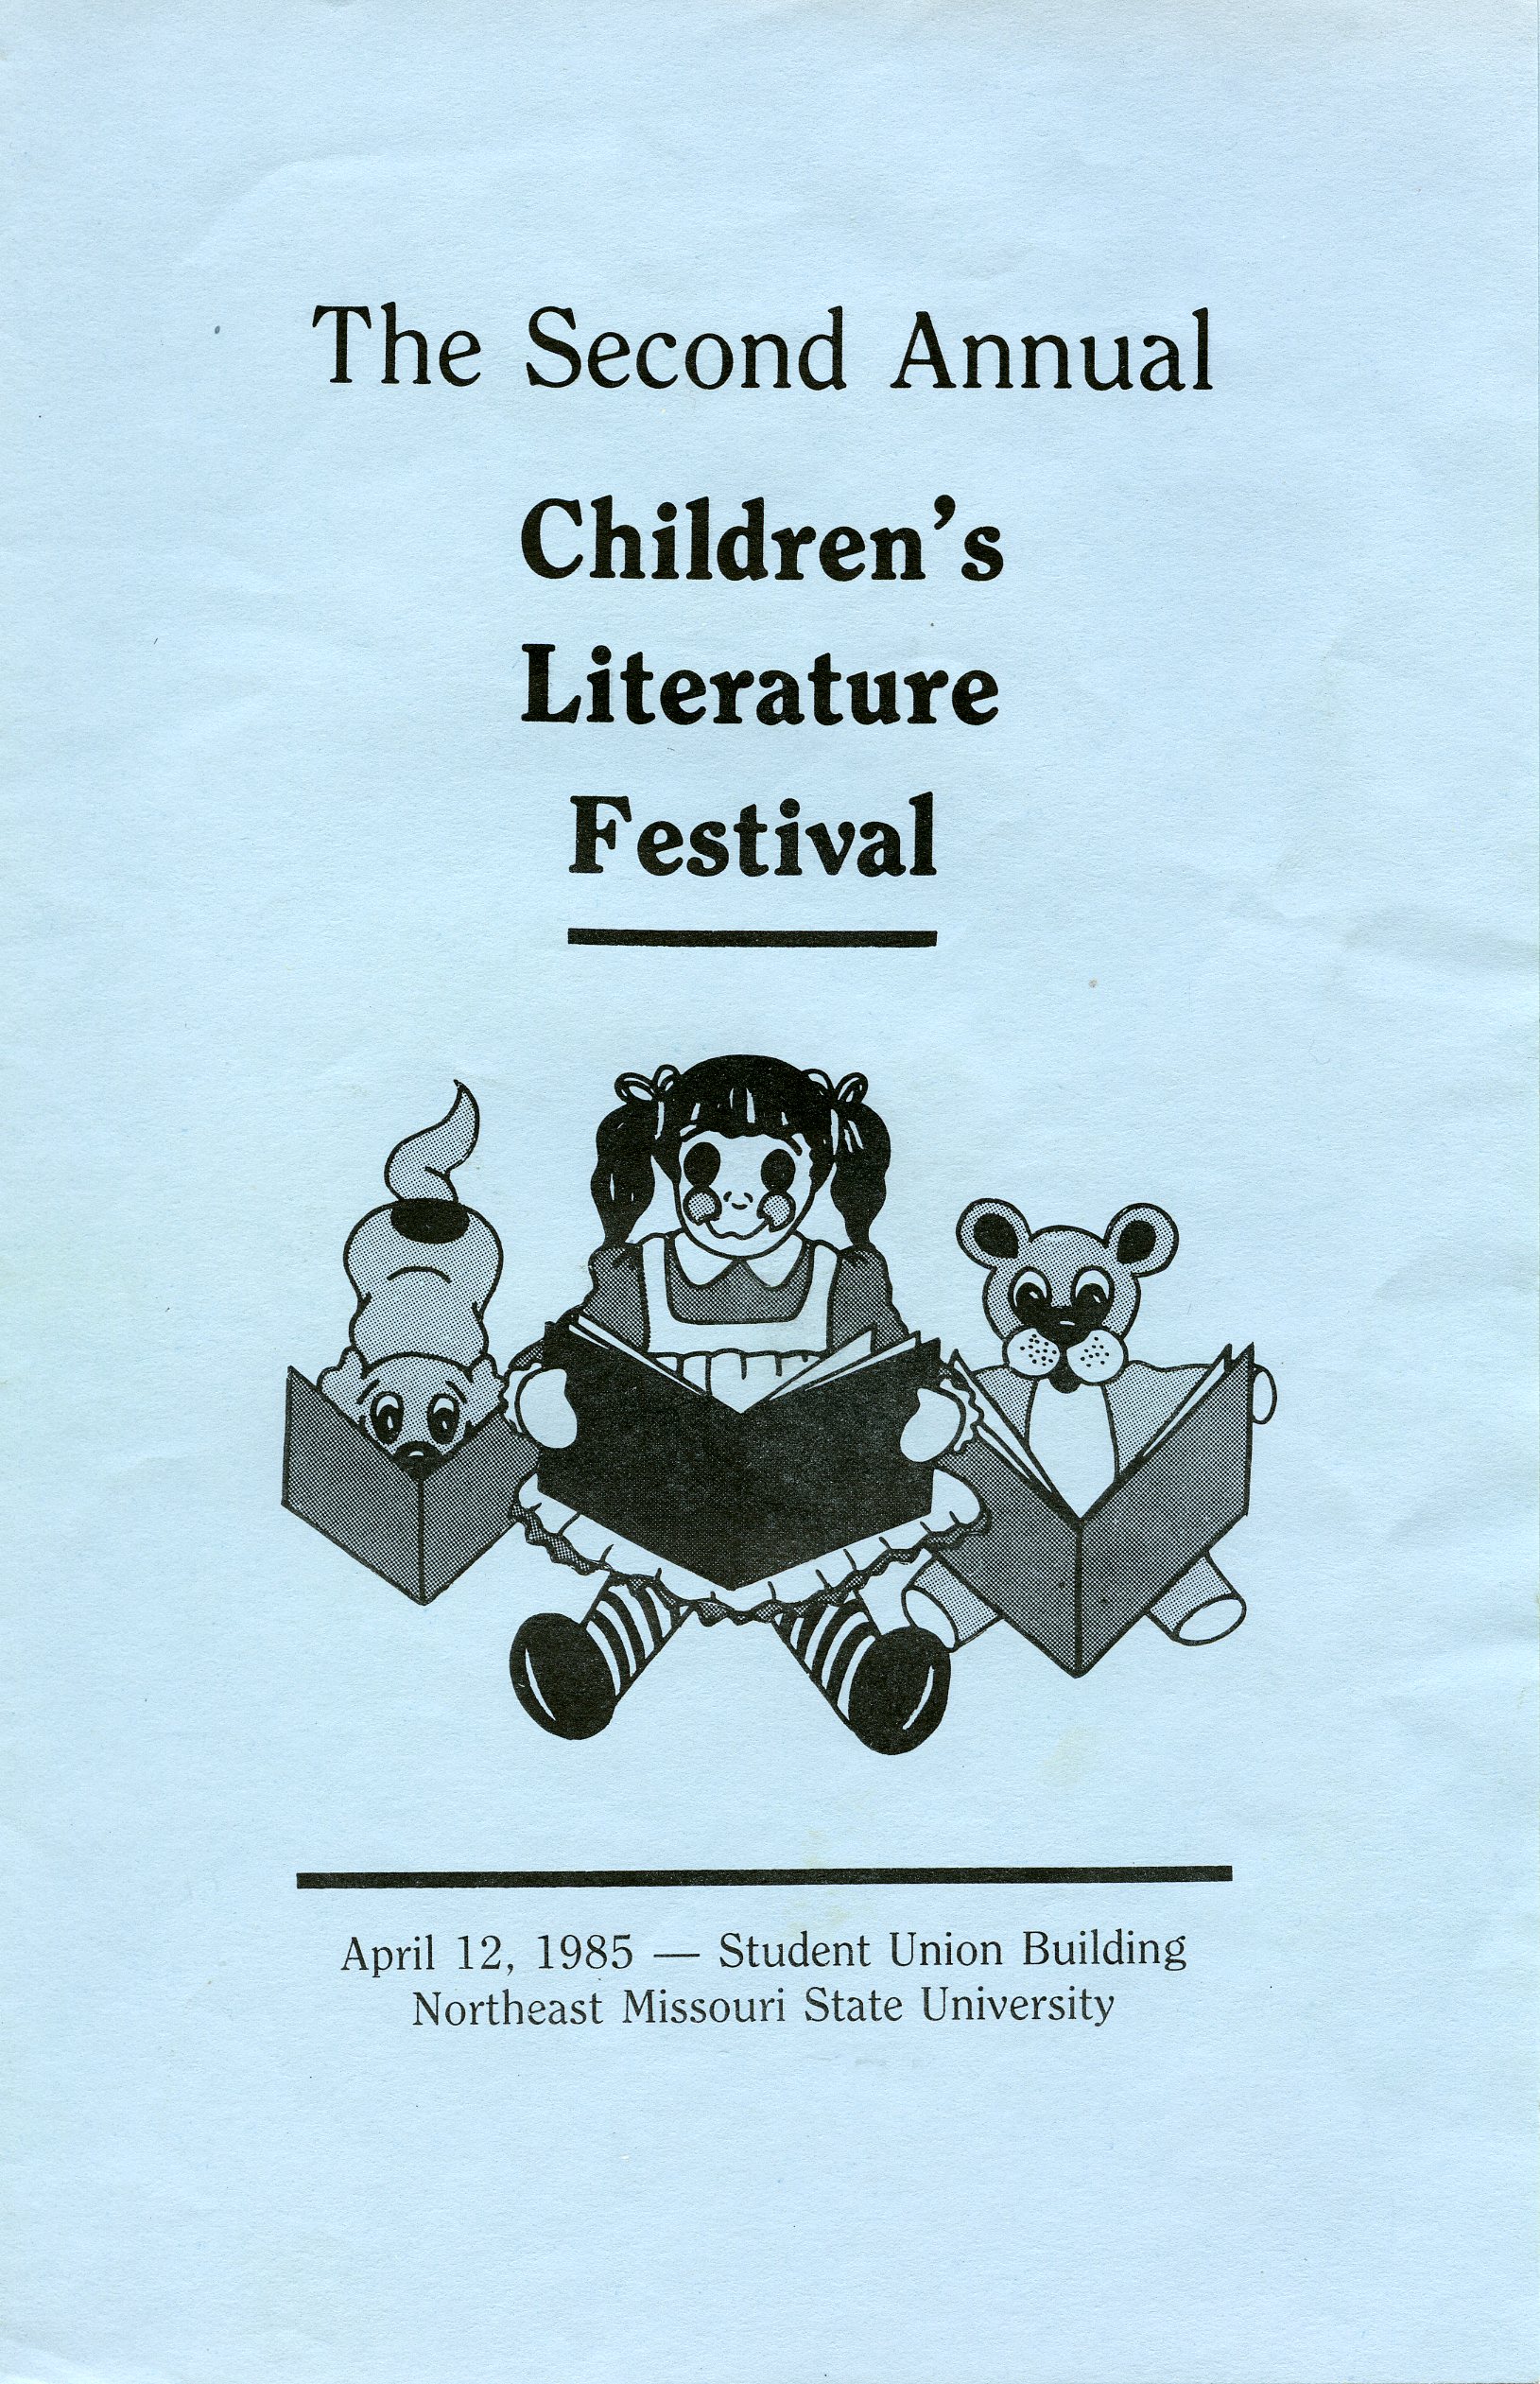 1985 brochure with reading dog, doll, and teddy bear